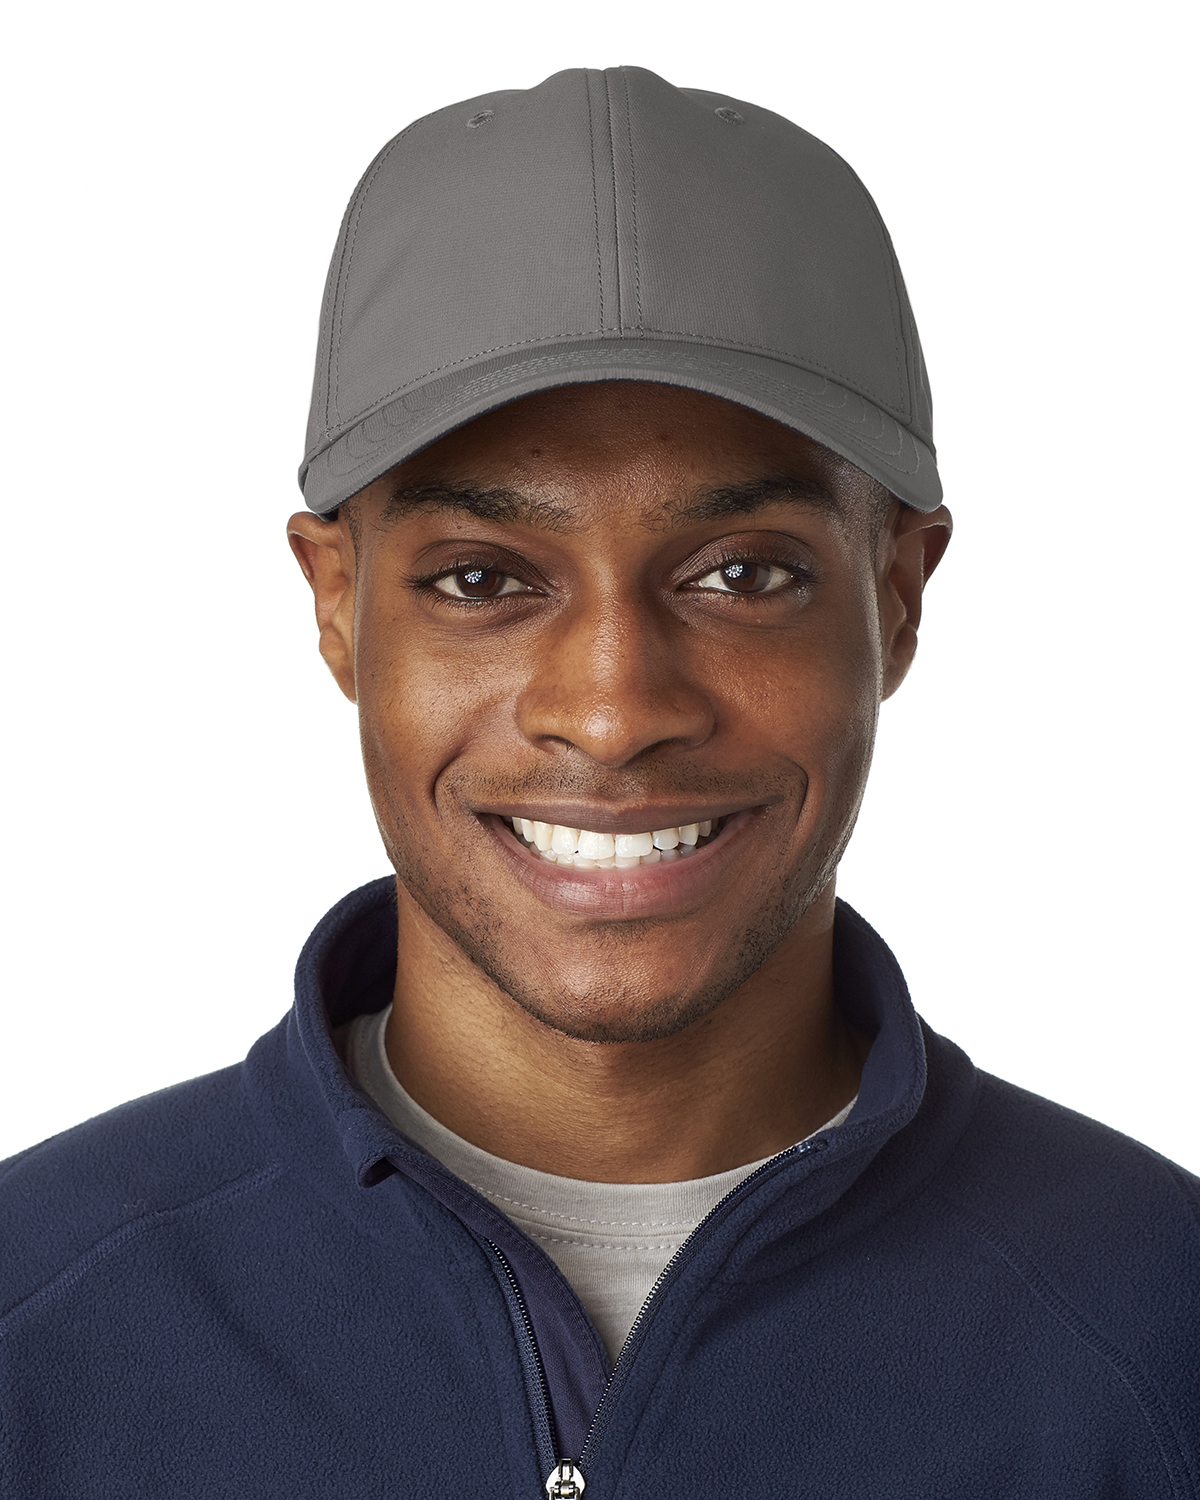 Custom Embroidered Golf Performance Max Front-Hit Relaxed Cap